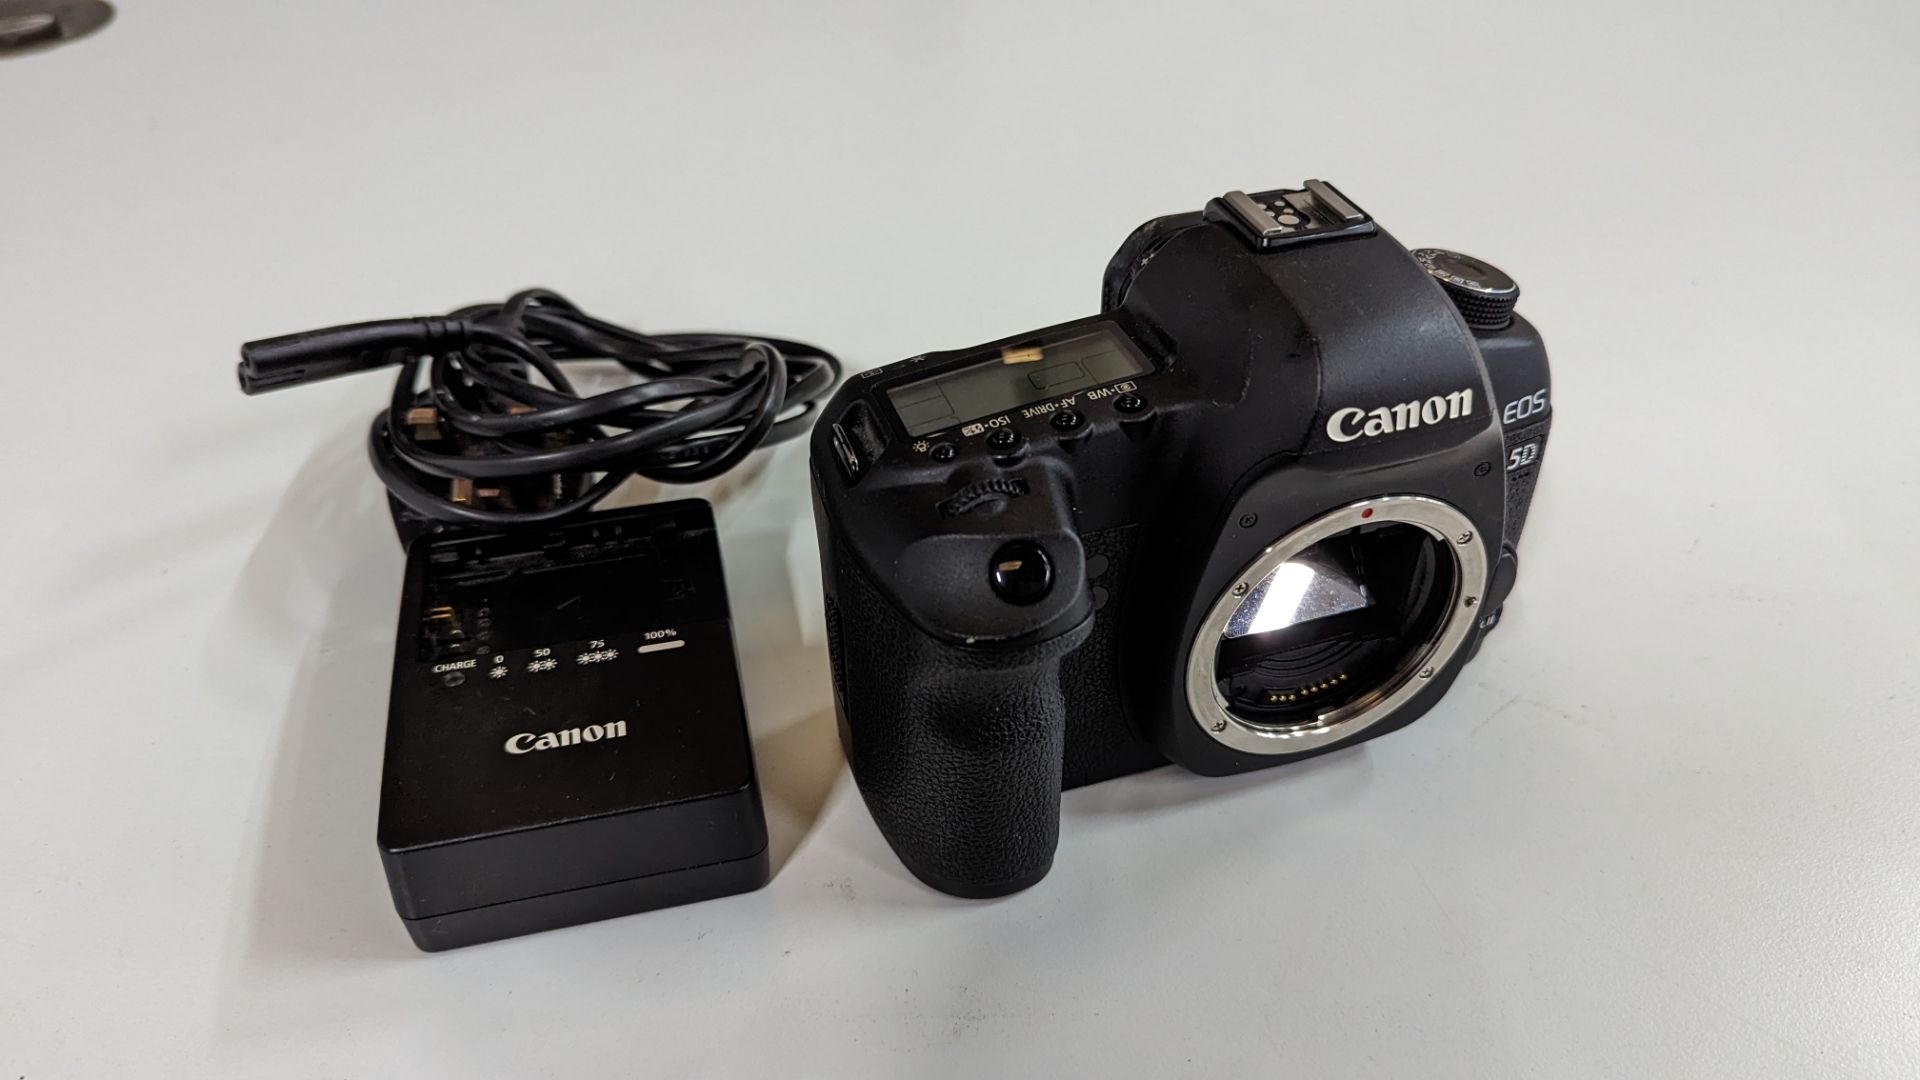 Canon EOS 5D Mark II digital camera plus Canon battery charger. N.B. no lens or battery included wi - Image 11 of 12